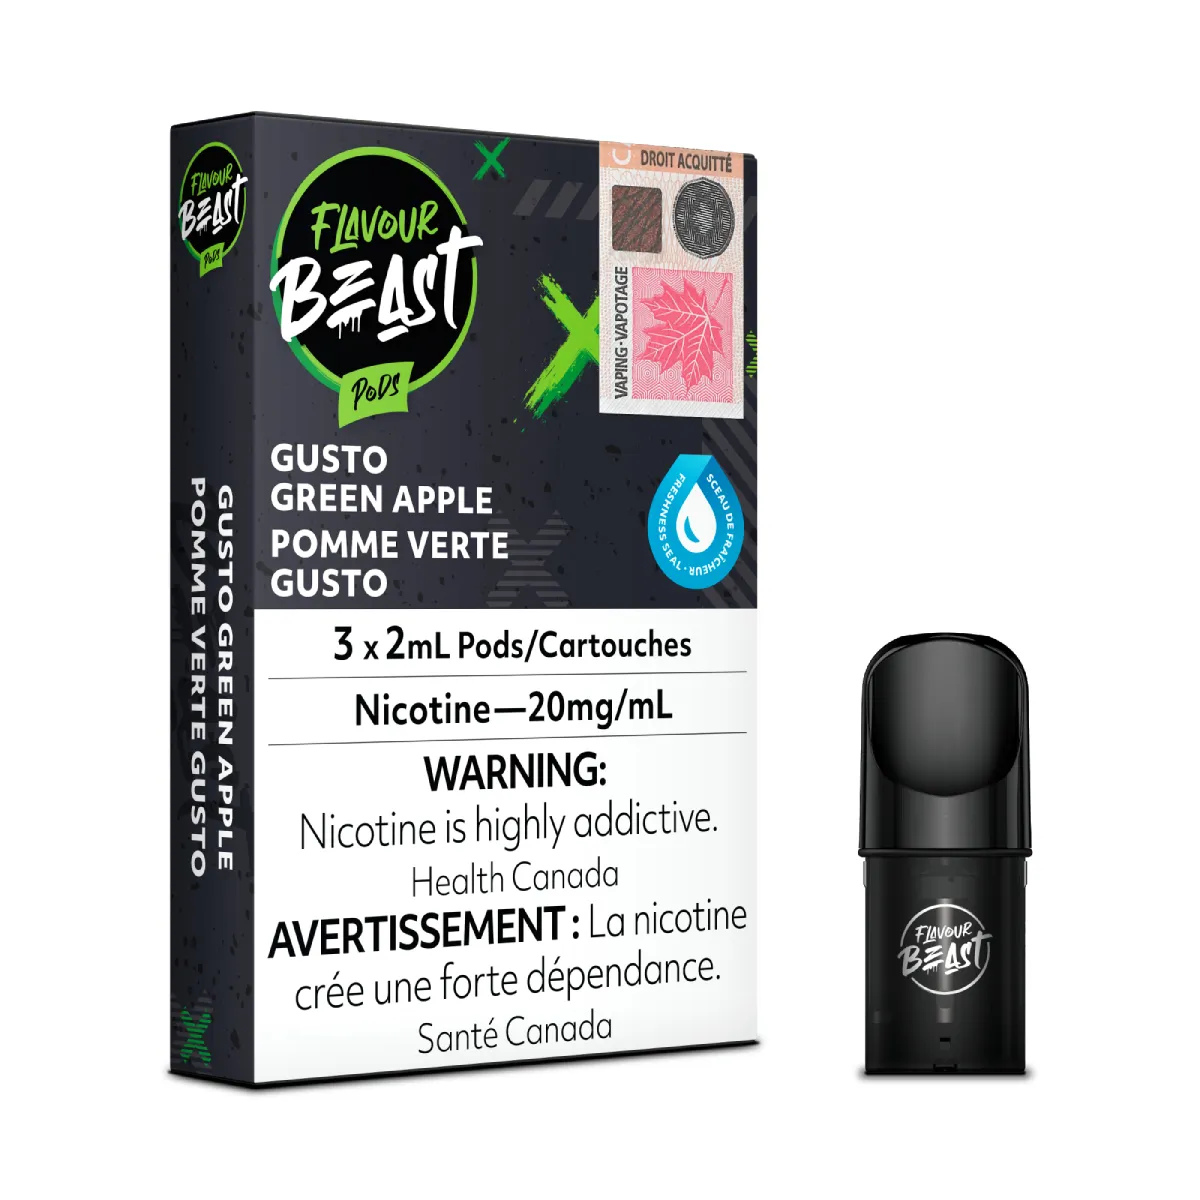 Flavour Beast Pods - Gusto Green Apple (3x2mL) (6757135188023)